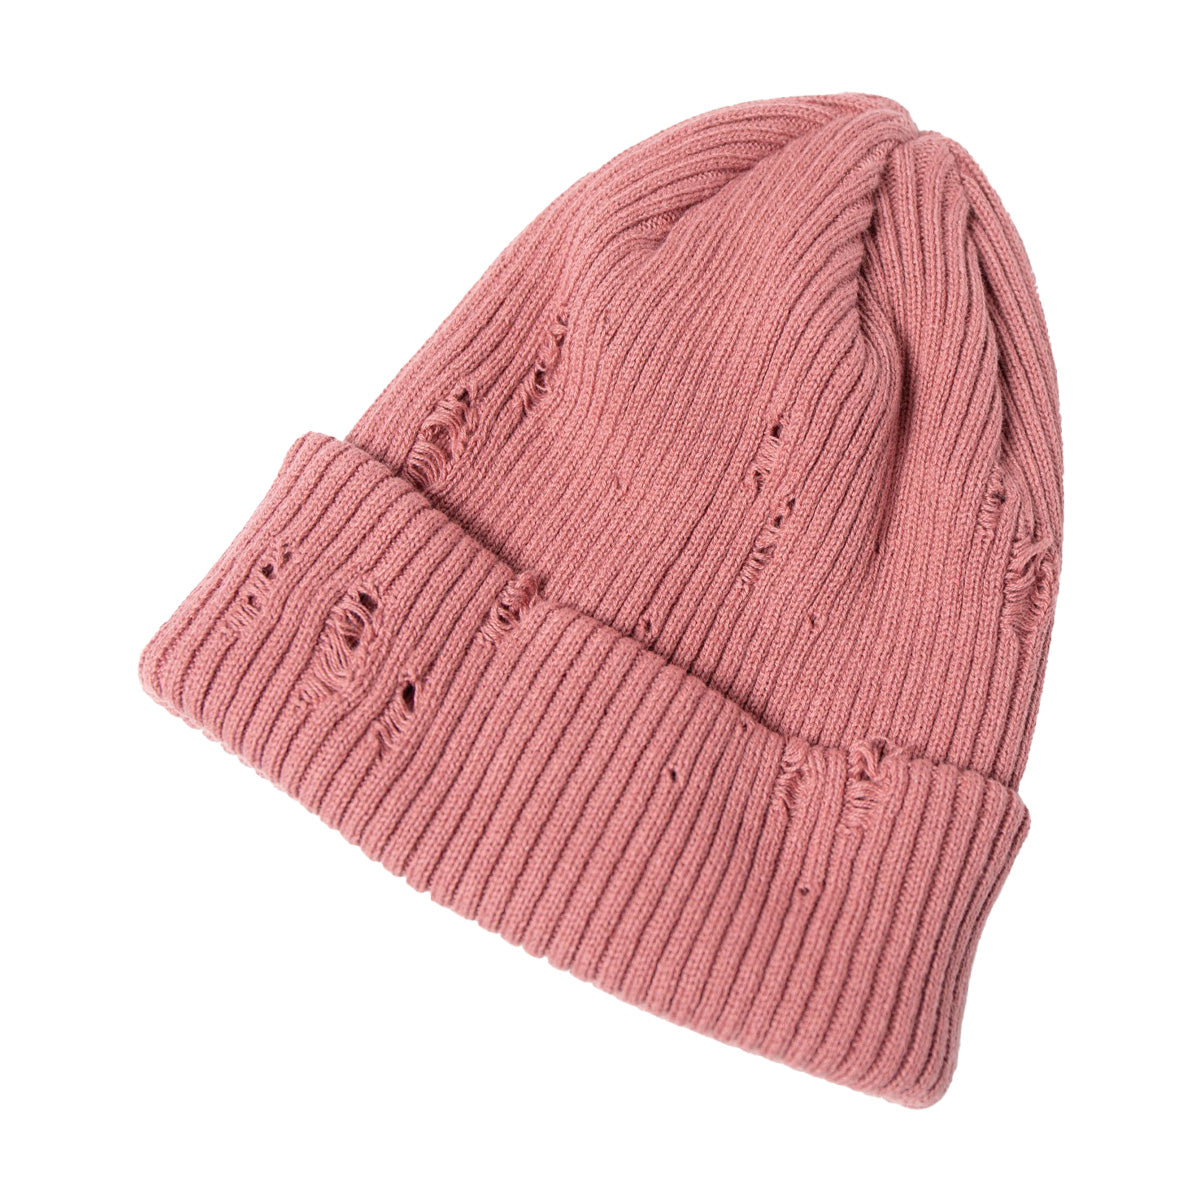 Racal Ripped Cotton Knit Watch Cap, Pink